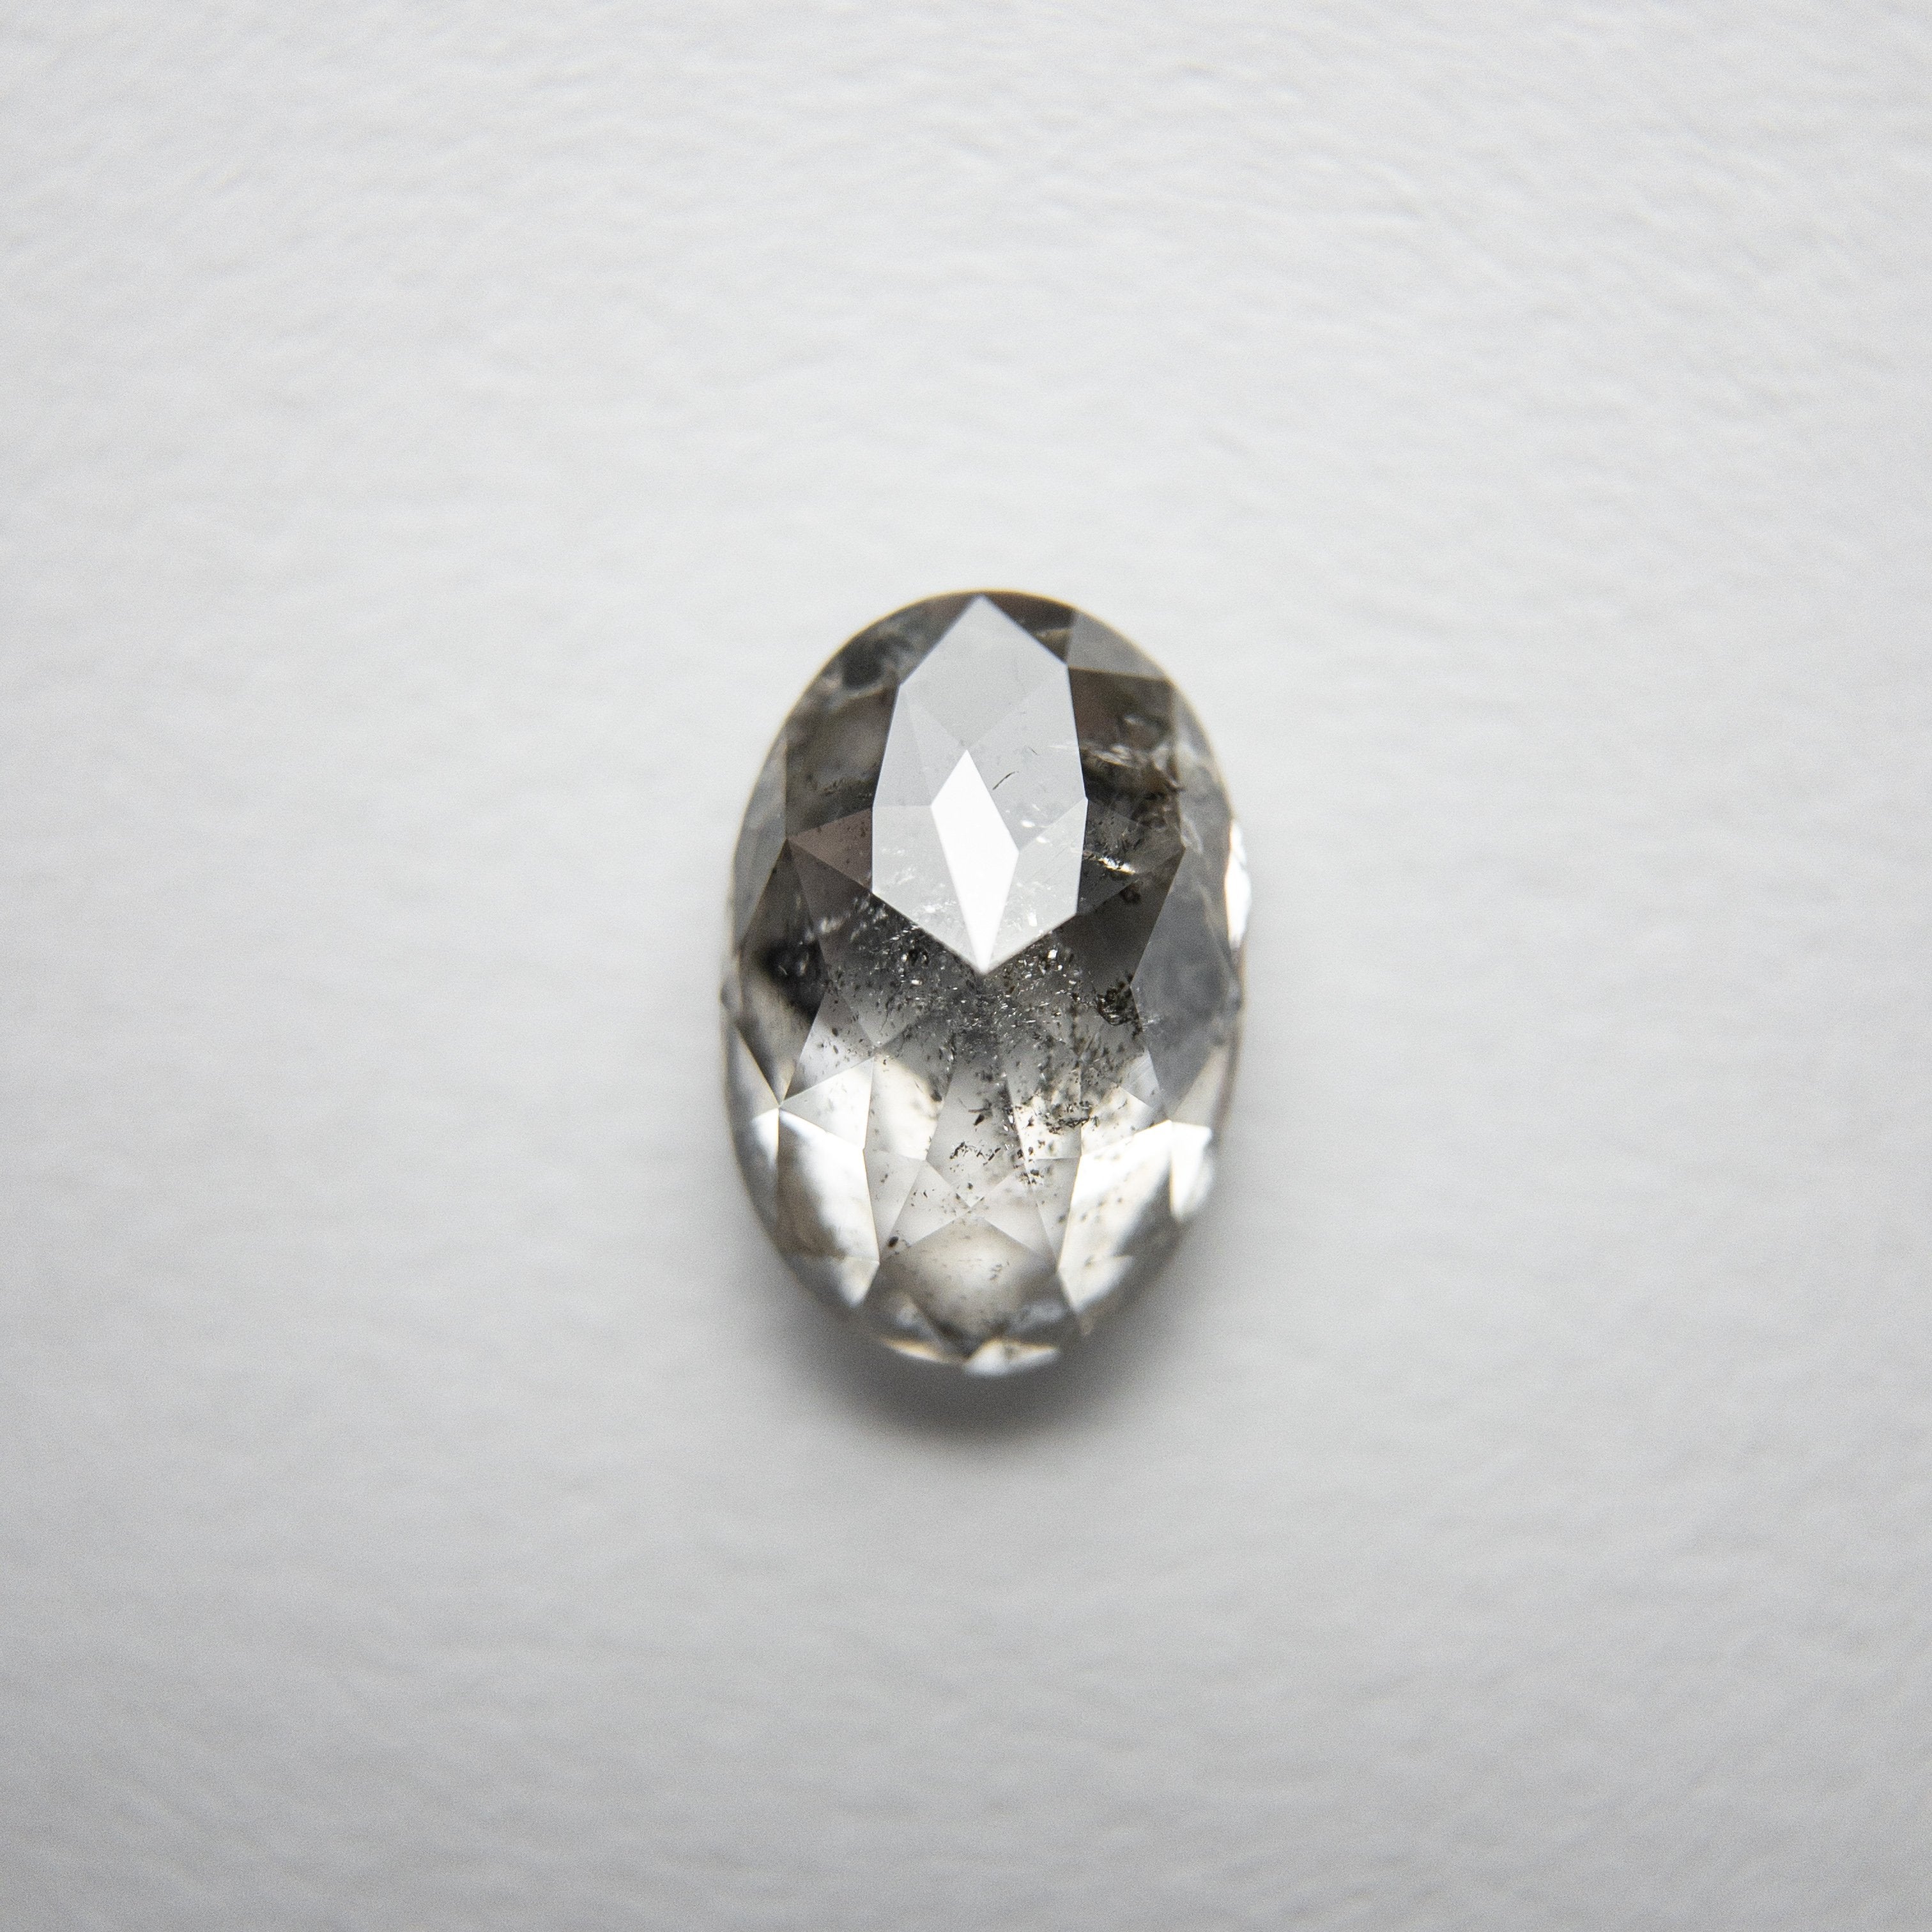 1.05ct 7.64x5.23x3.16mm Oval Double Cut 18219-05 hold D1016